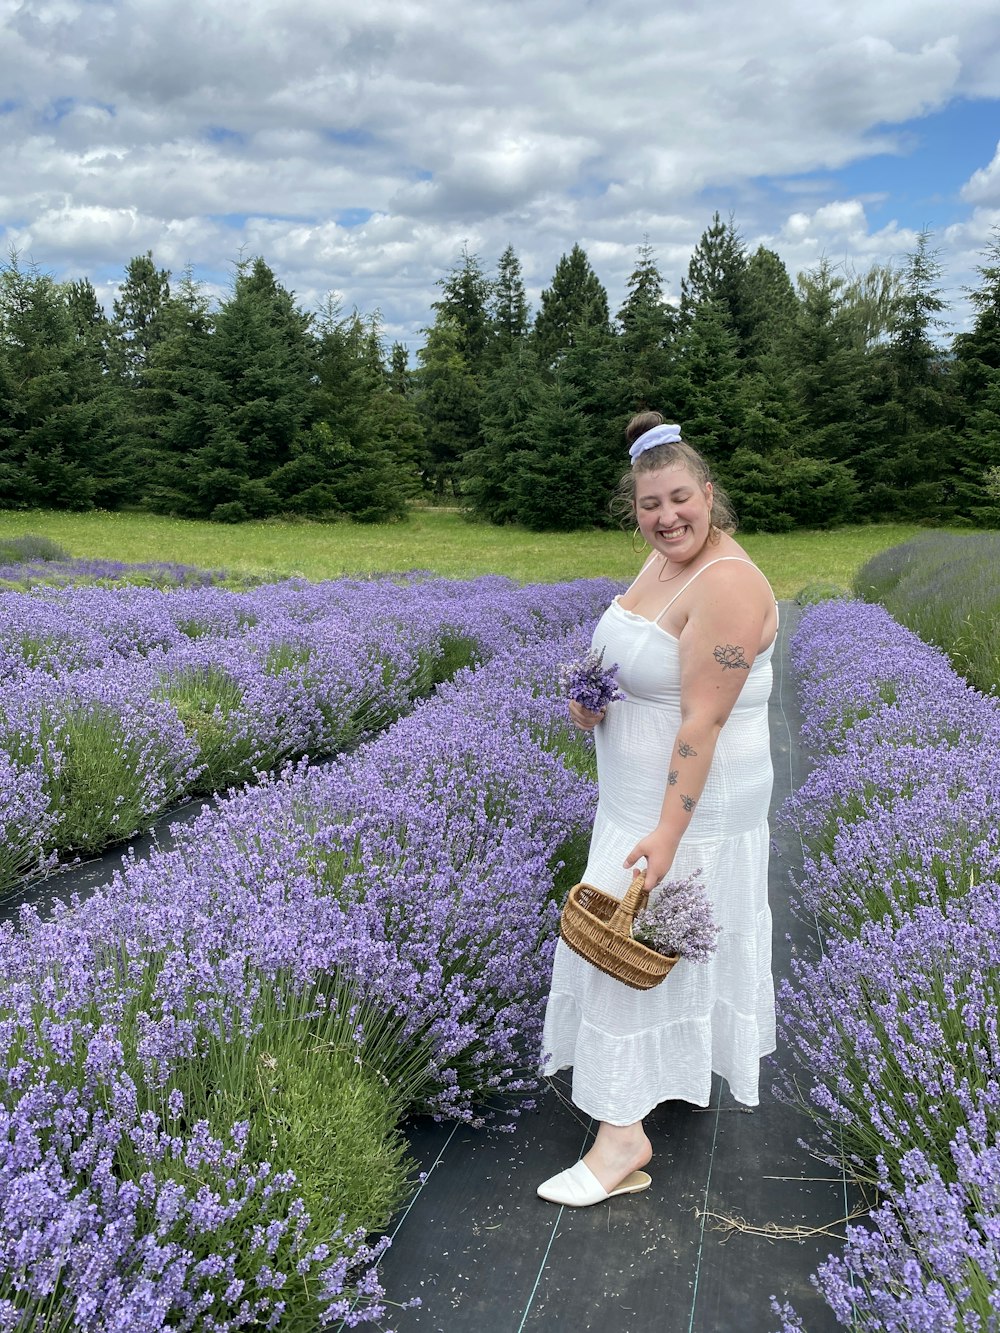 a person standing in a field of purple flowers